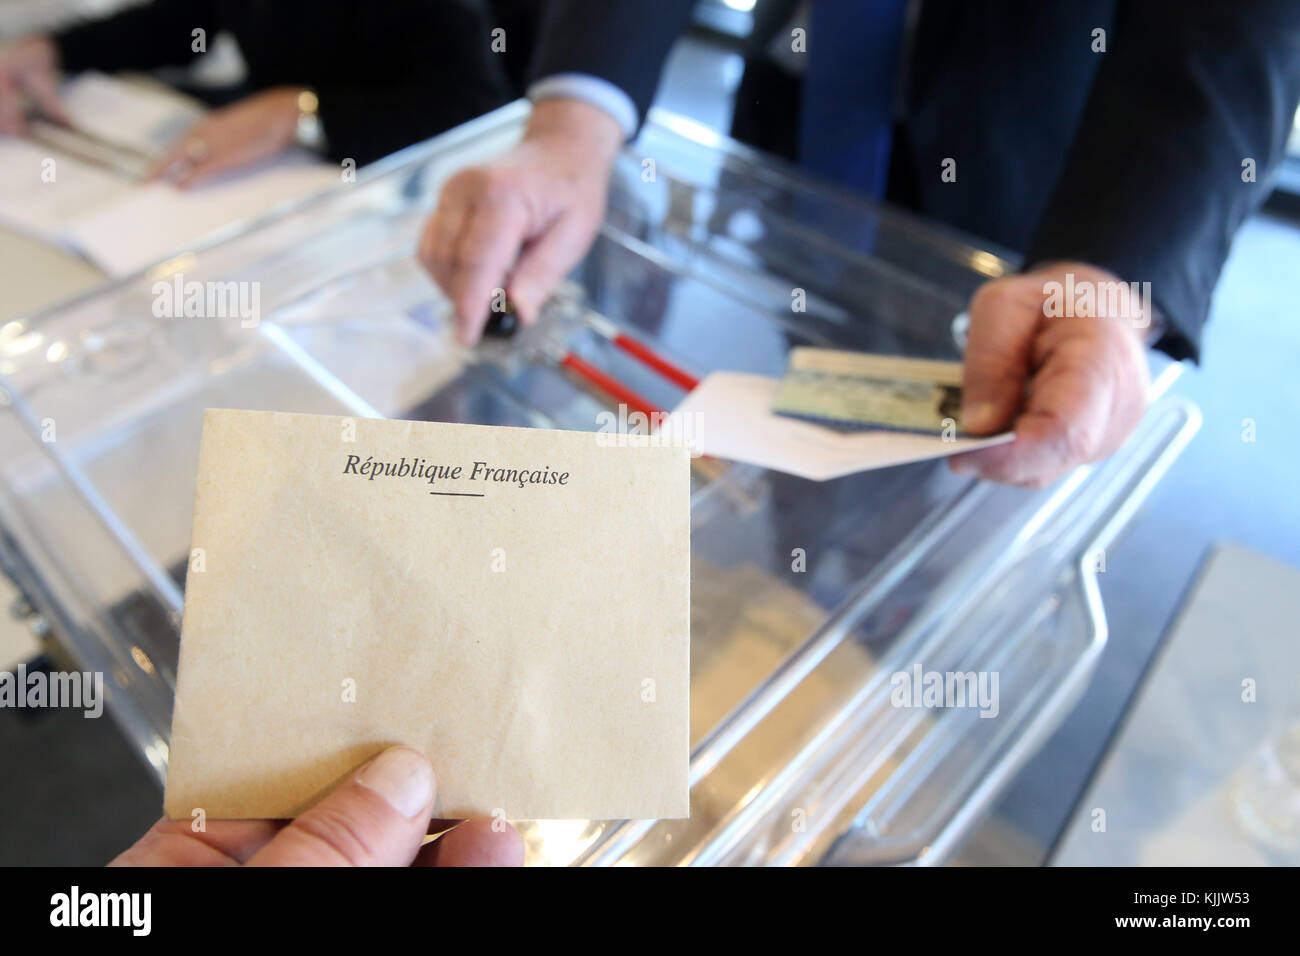 Polling Booth in France. Hand dropping ballot.  France. Stock Photo